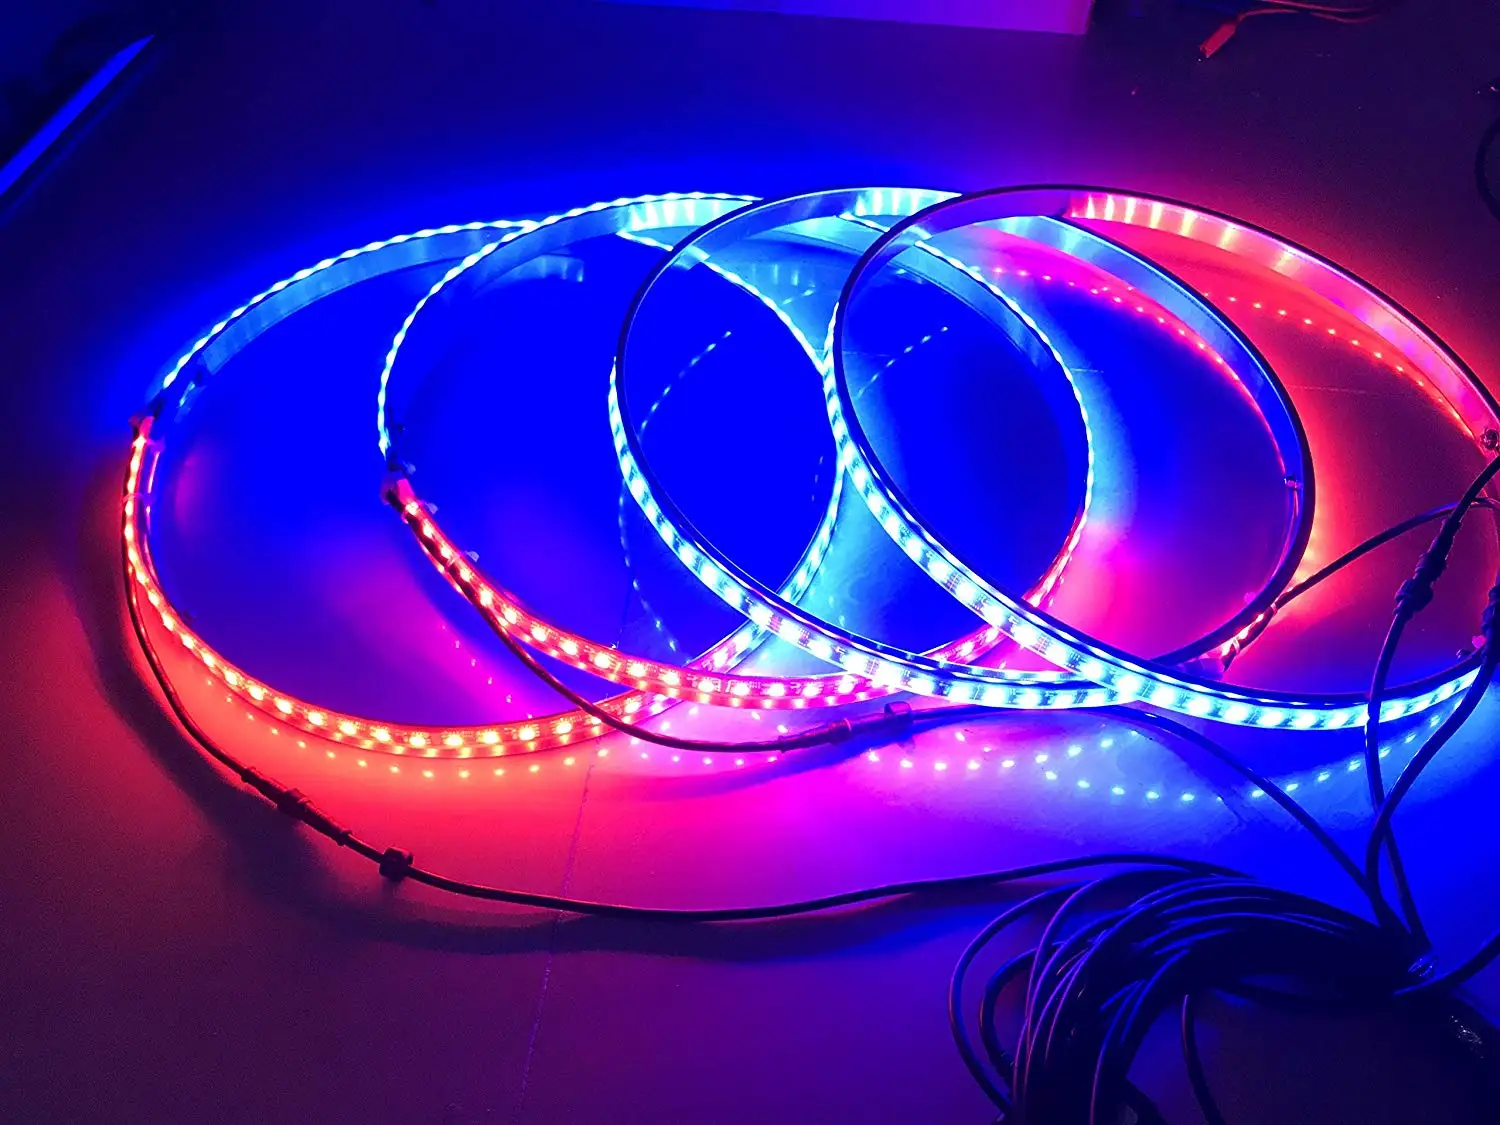 Set of 17 inch LED Wheel Ring Lights Car Truck LED Mixed Color Chaser Flowing Blue-tooth